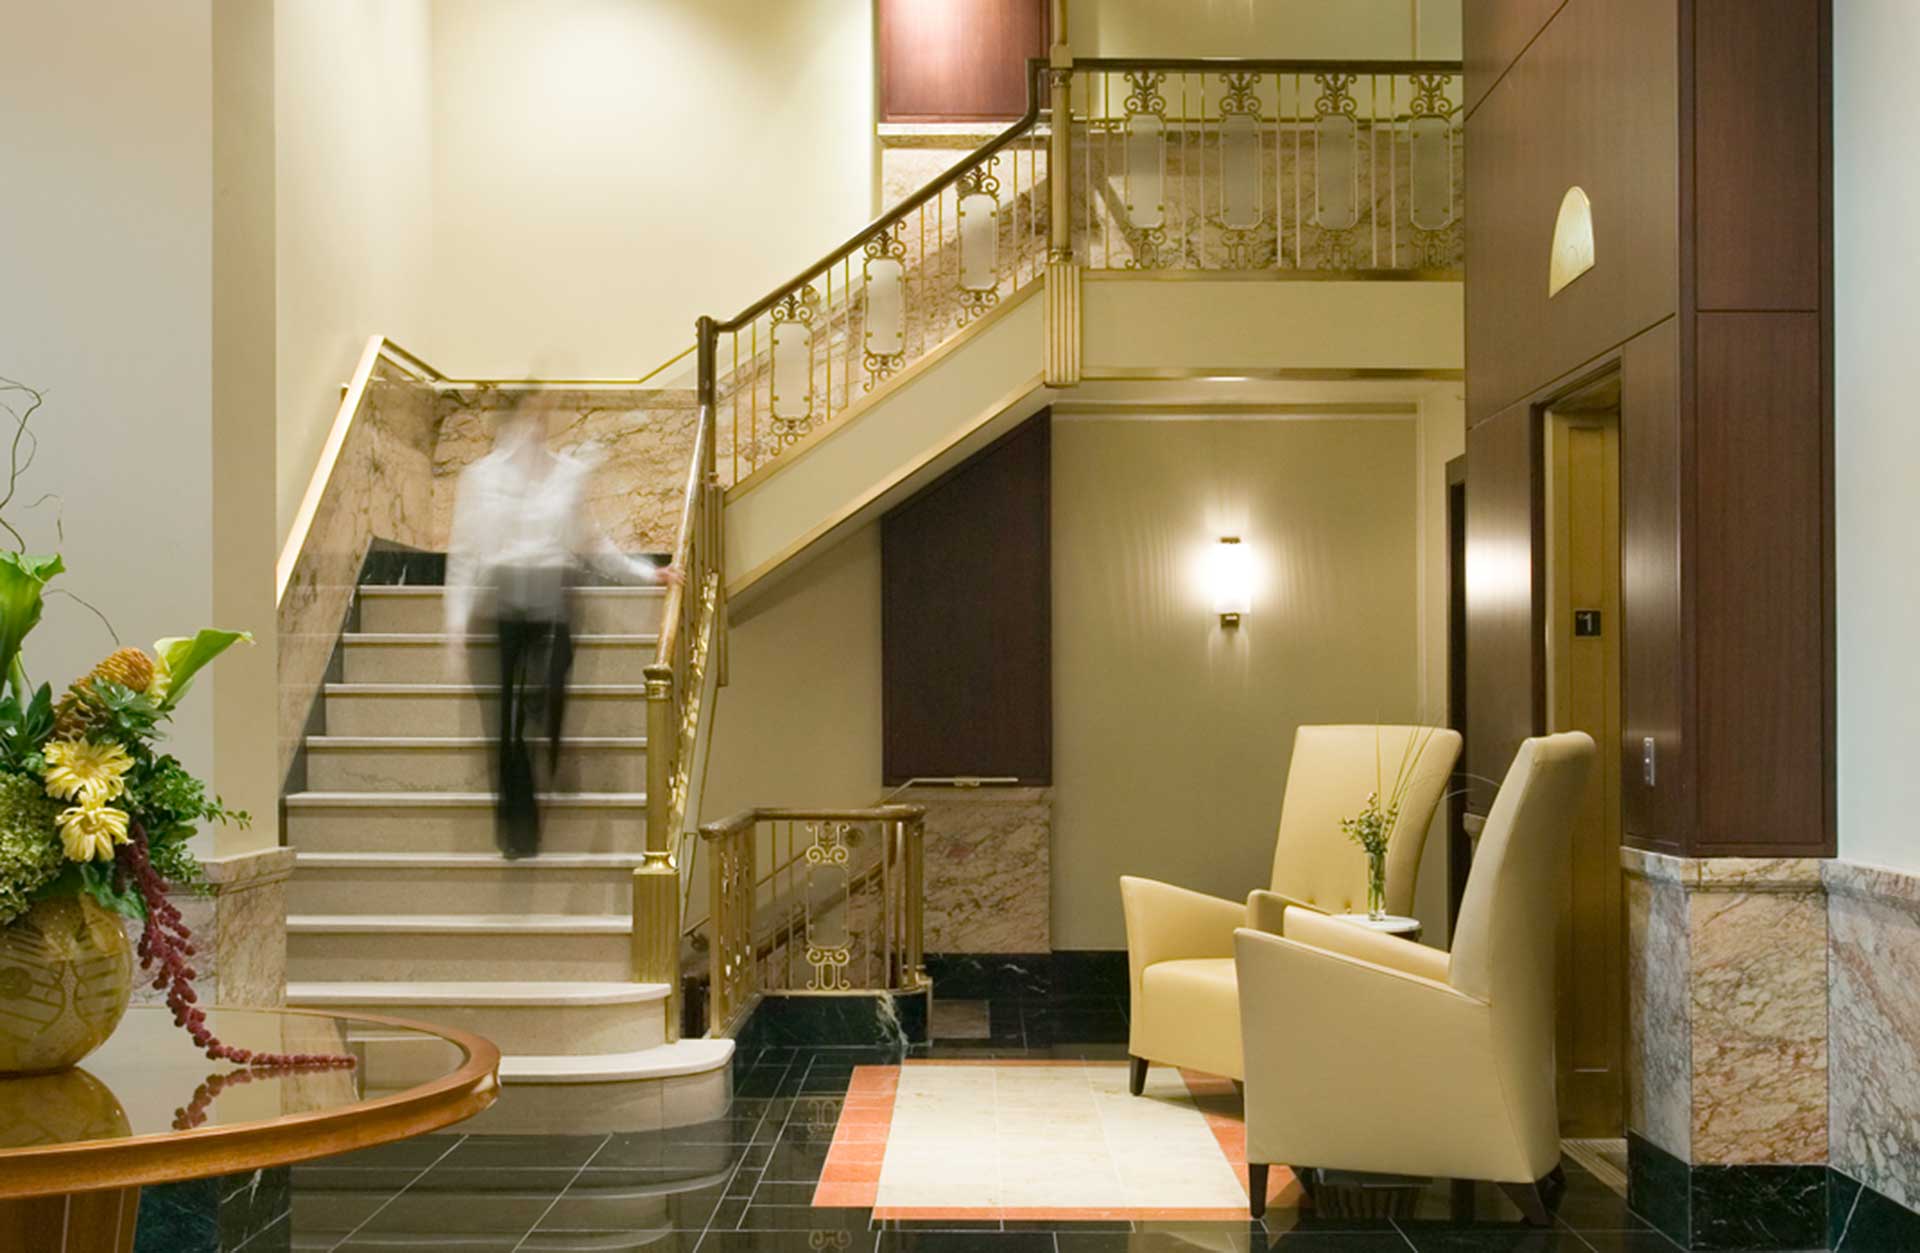 The Cobb Apartments lobby and stairs